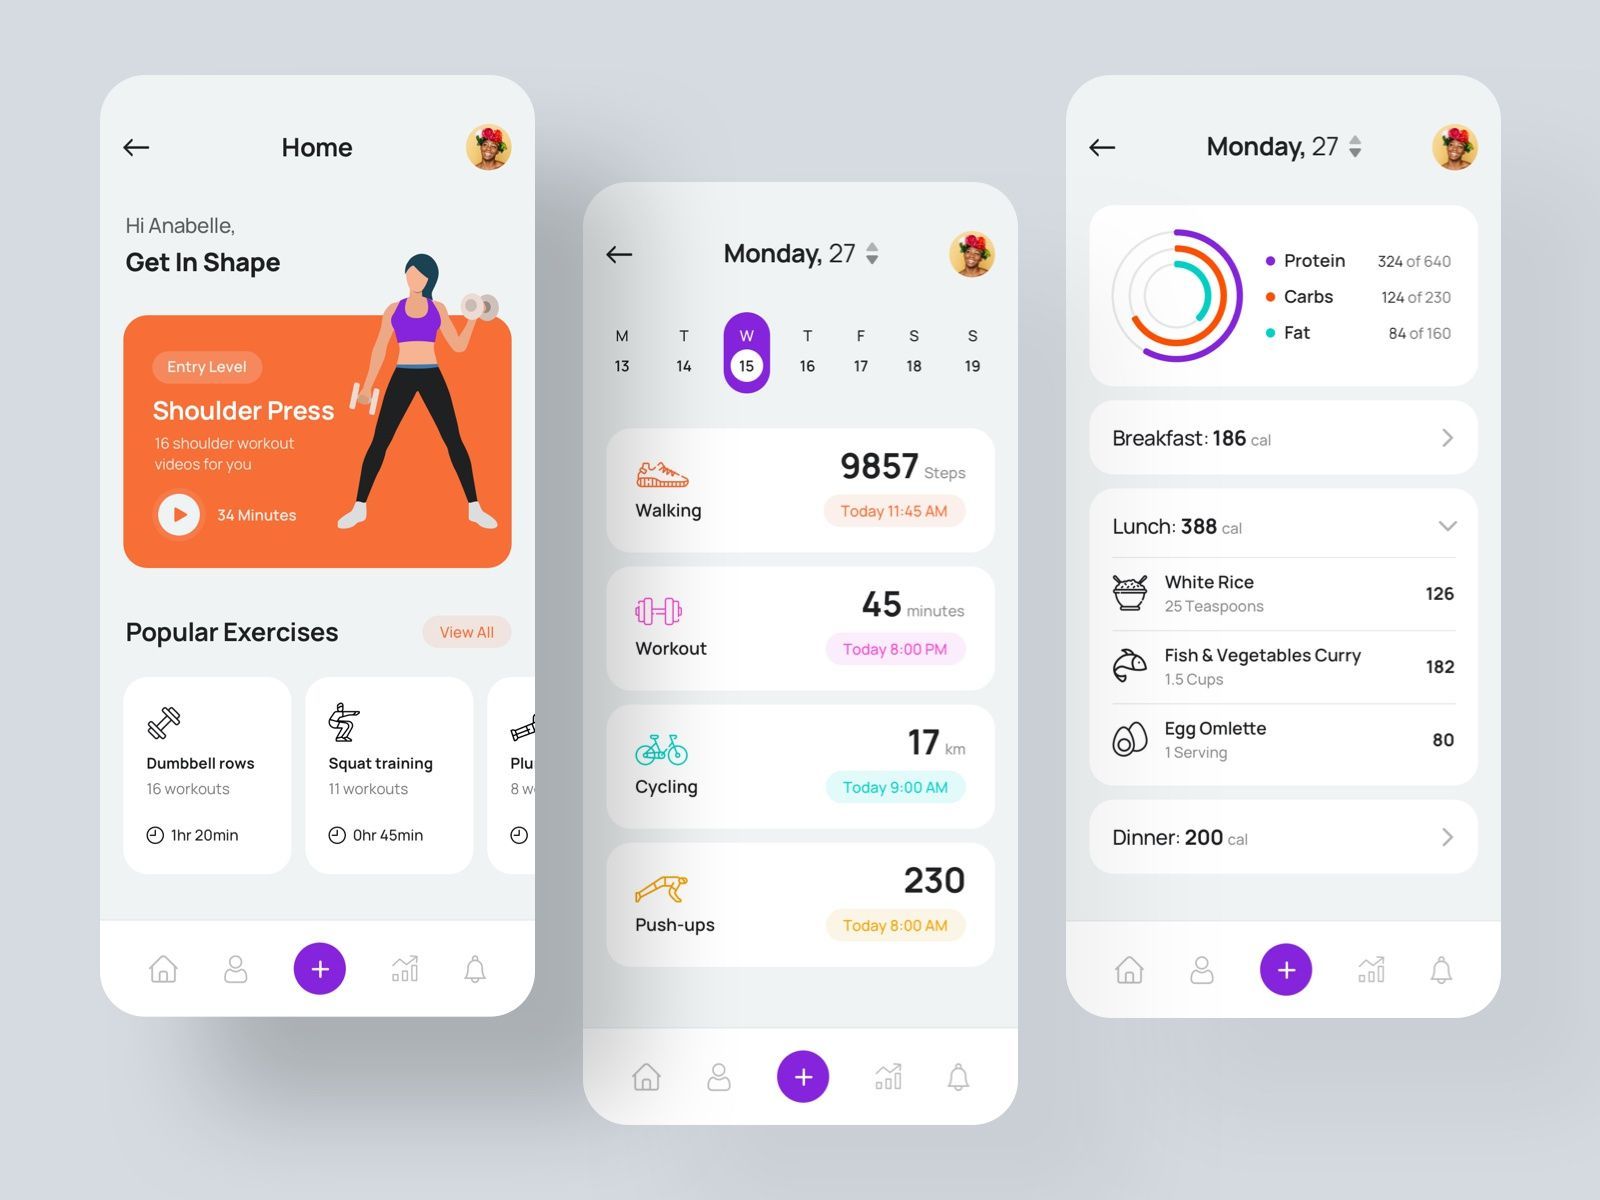 Health and Wellness Apps: Taking Care of Mind and Body